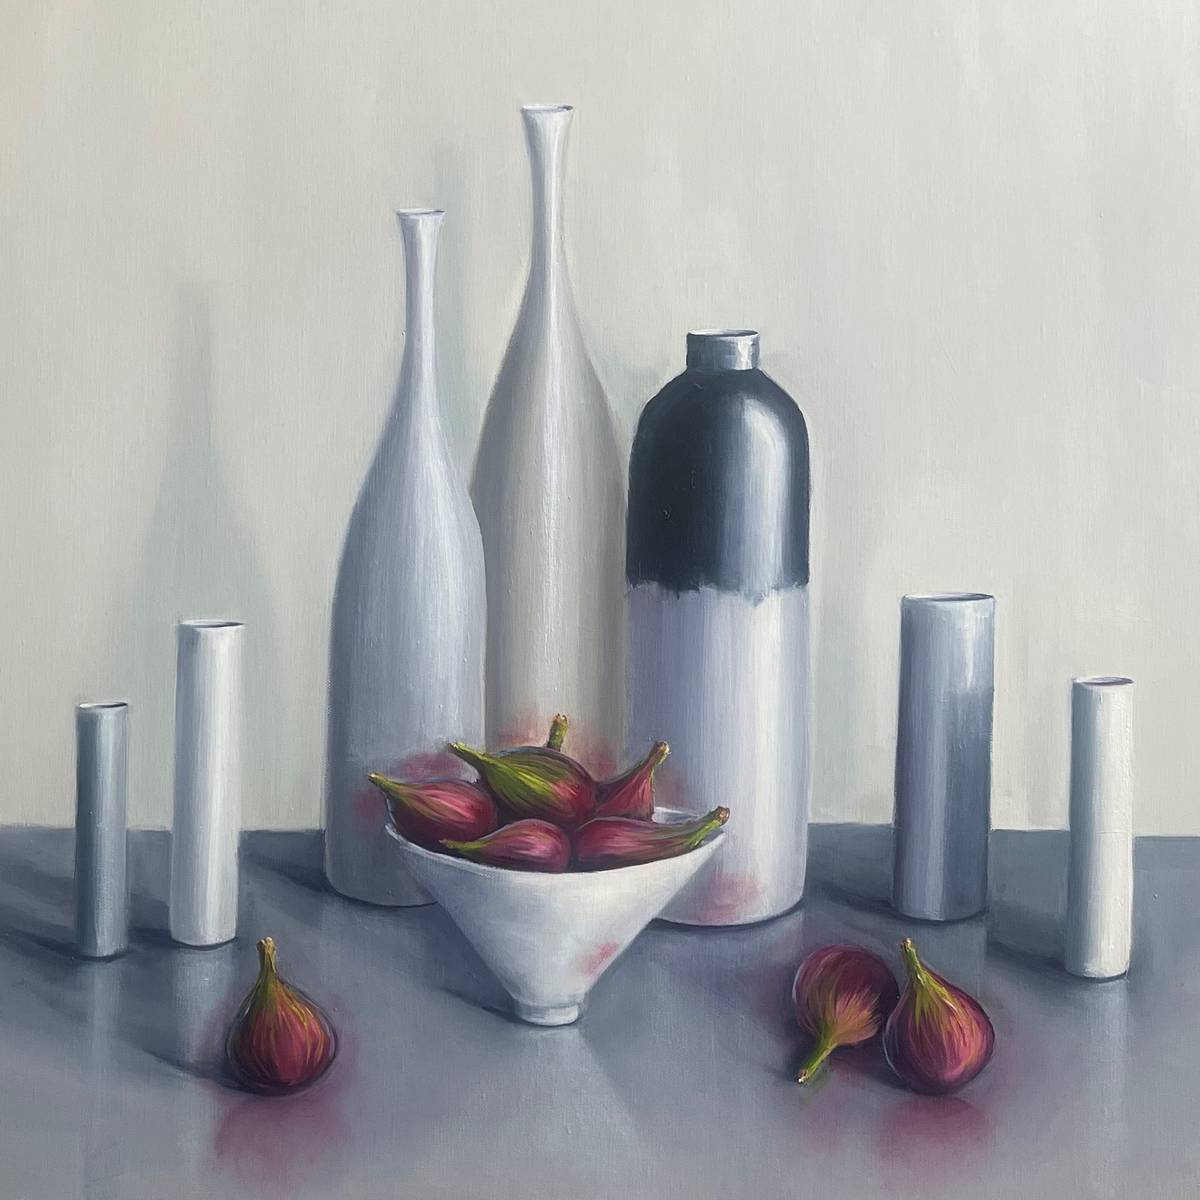 NewingerART: "Pale Bottles & Cylinders With Luscious Purple Figs" (Jonquil Williamson, 2023)